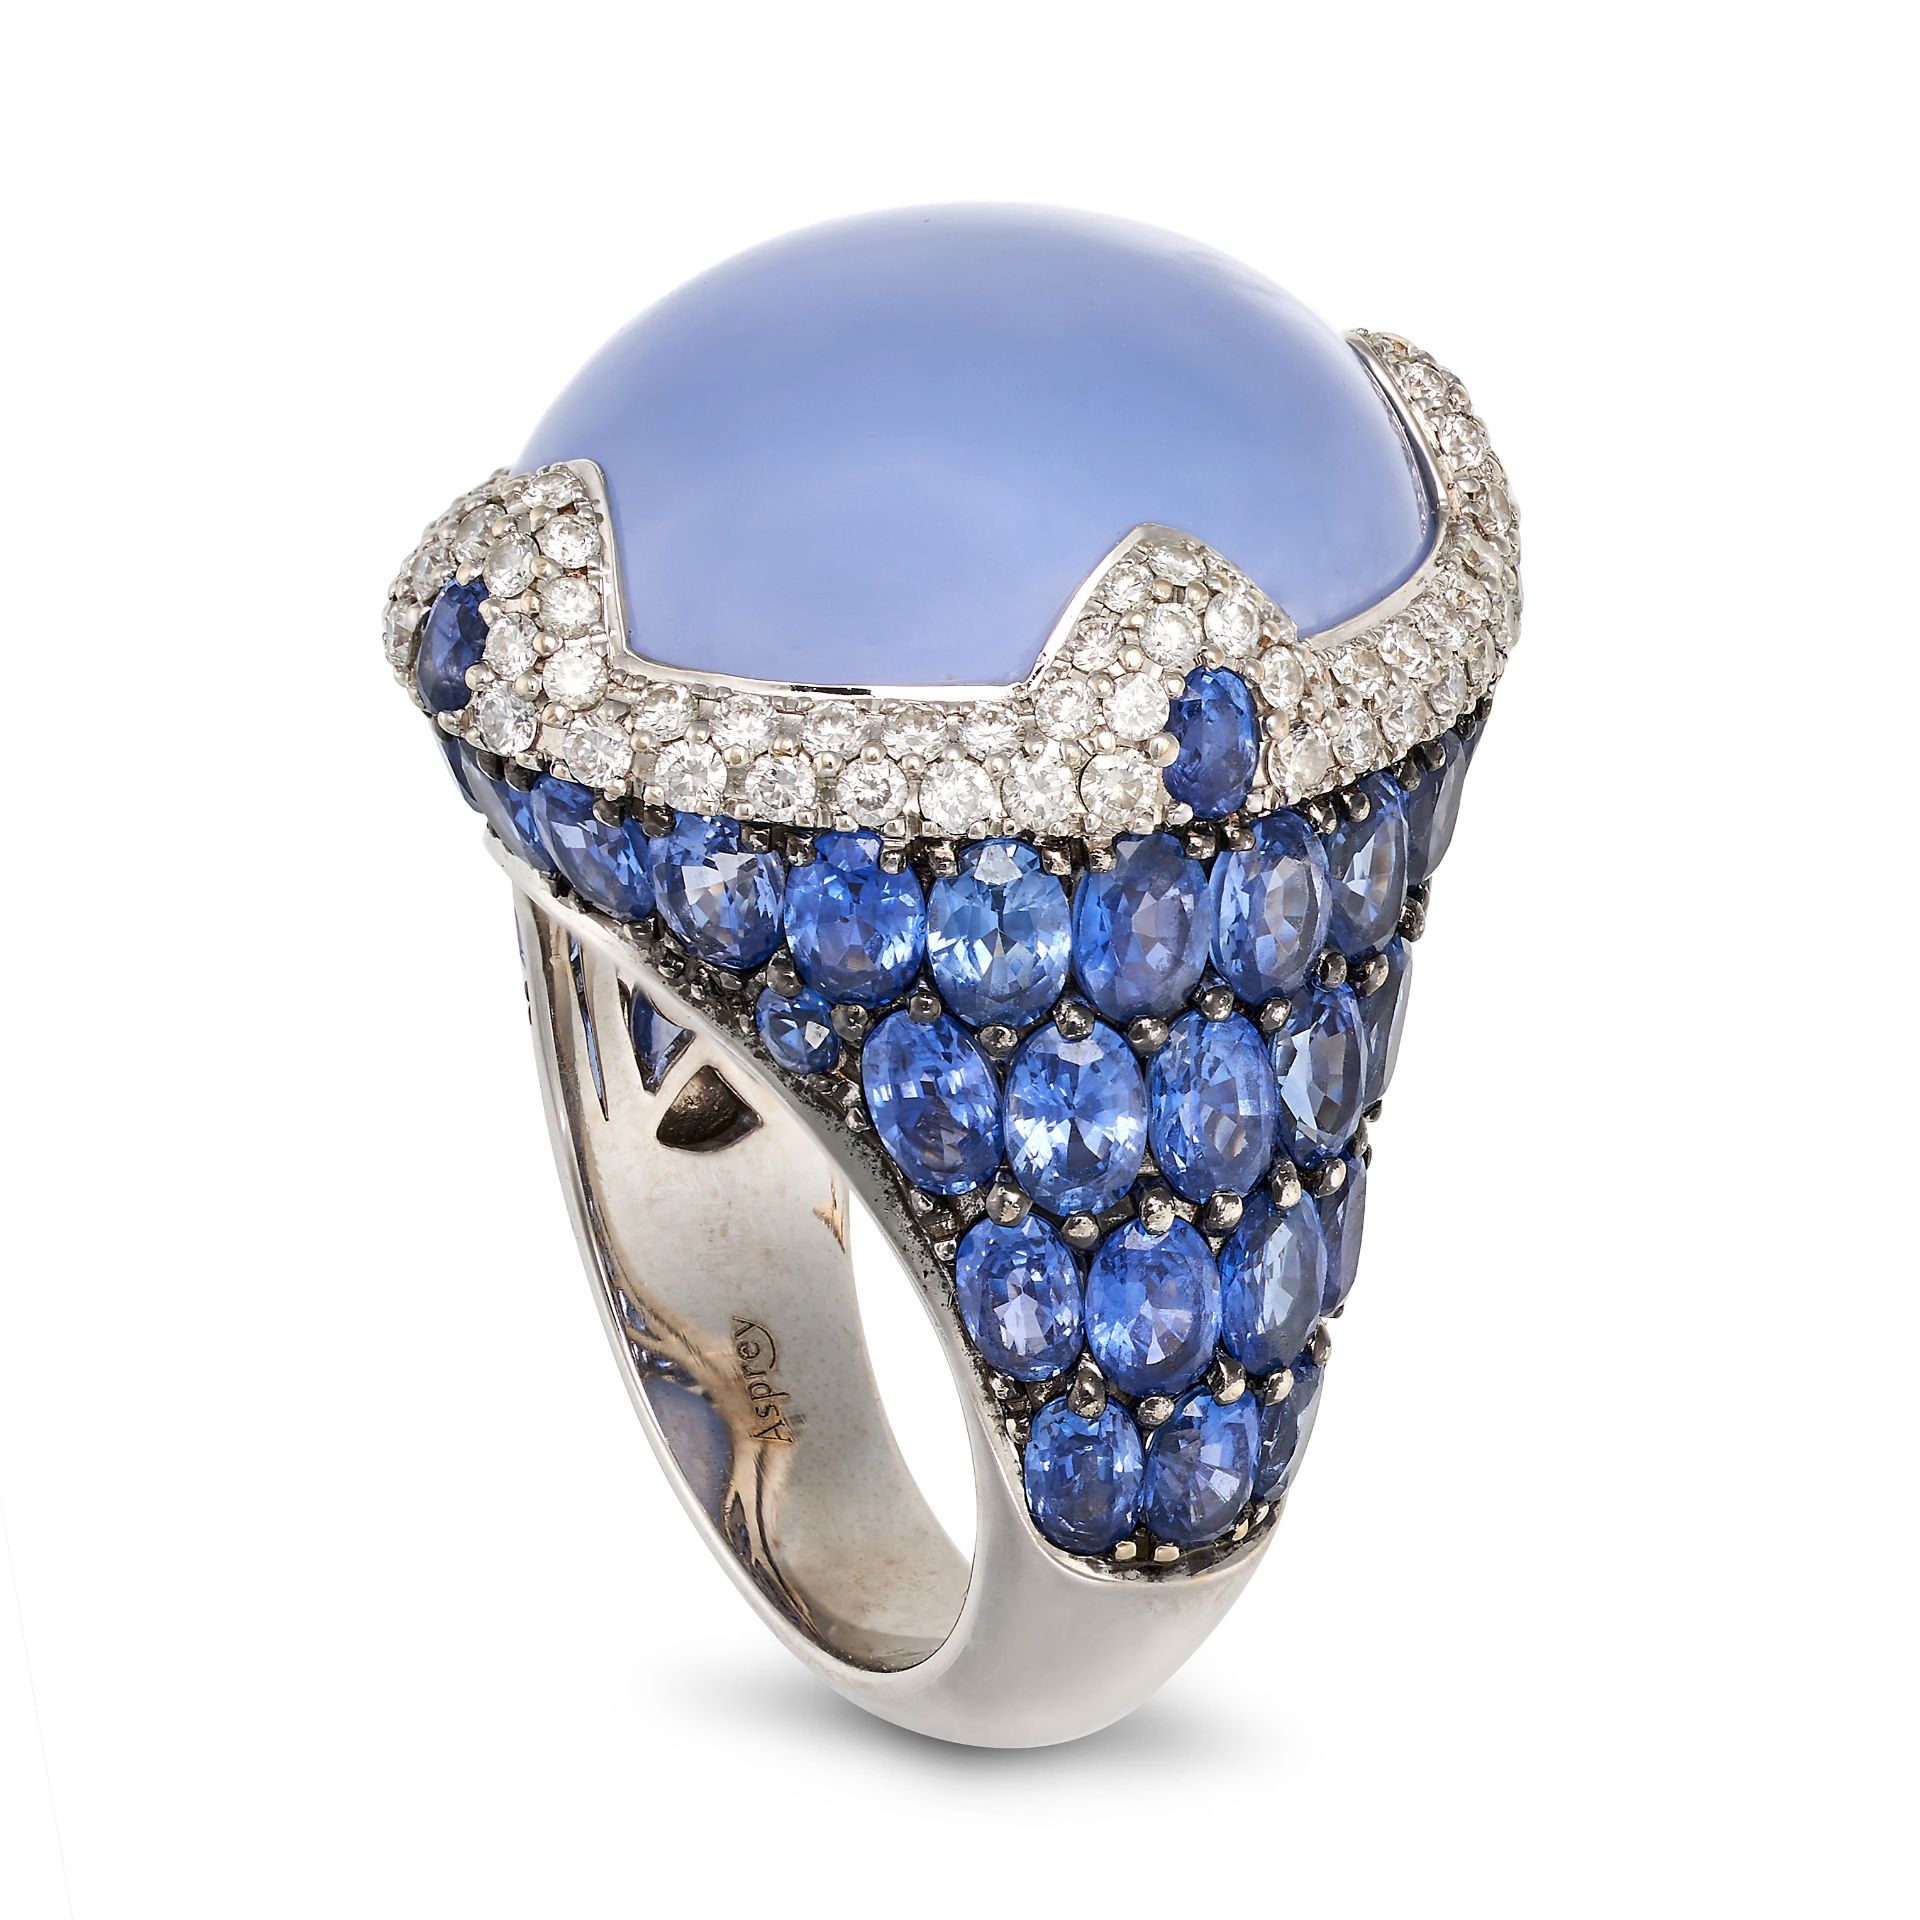 ASPREY, A BLUE CHALCEDONY, SAPPHIRE AND DIAMOND COCKTAIL RING in 18ct white gold, the domed body ... - Image 2 of 2